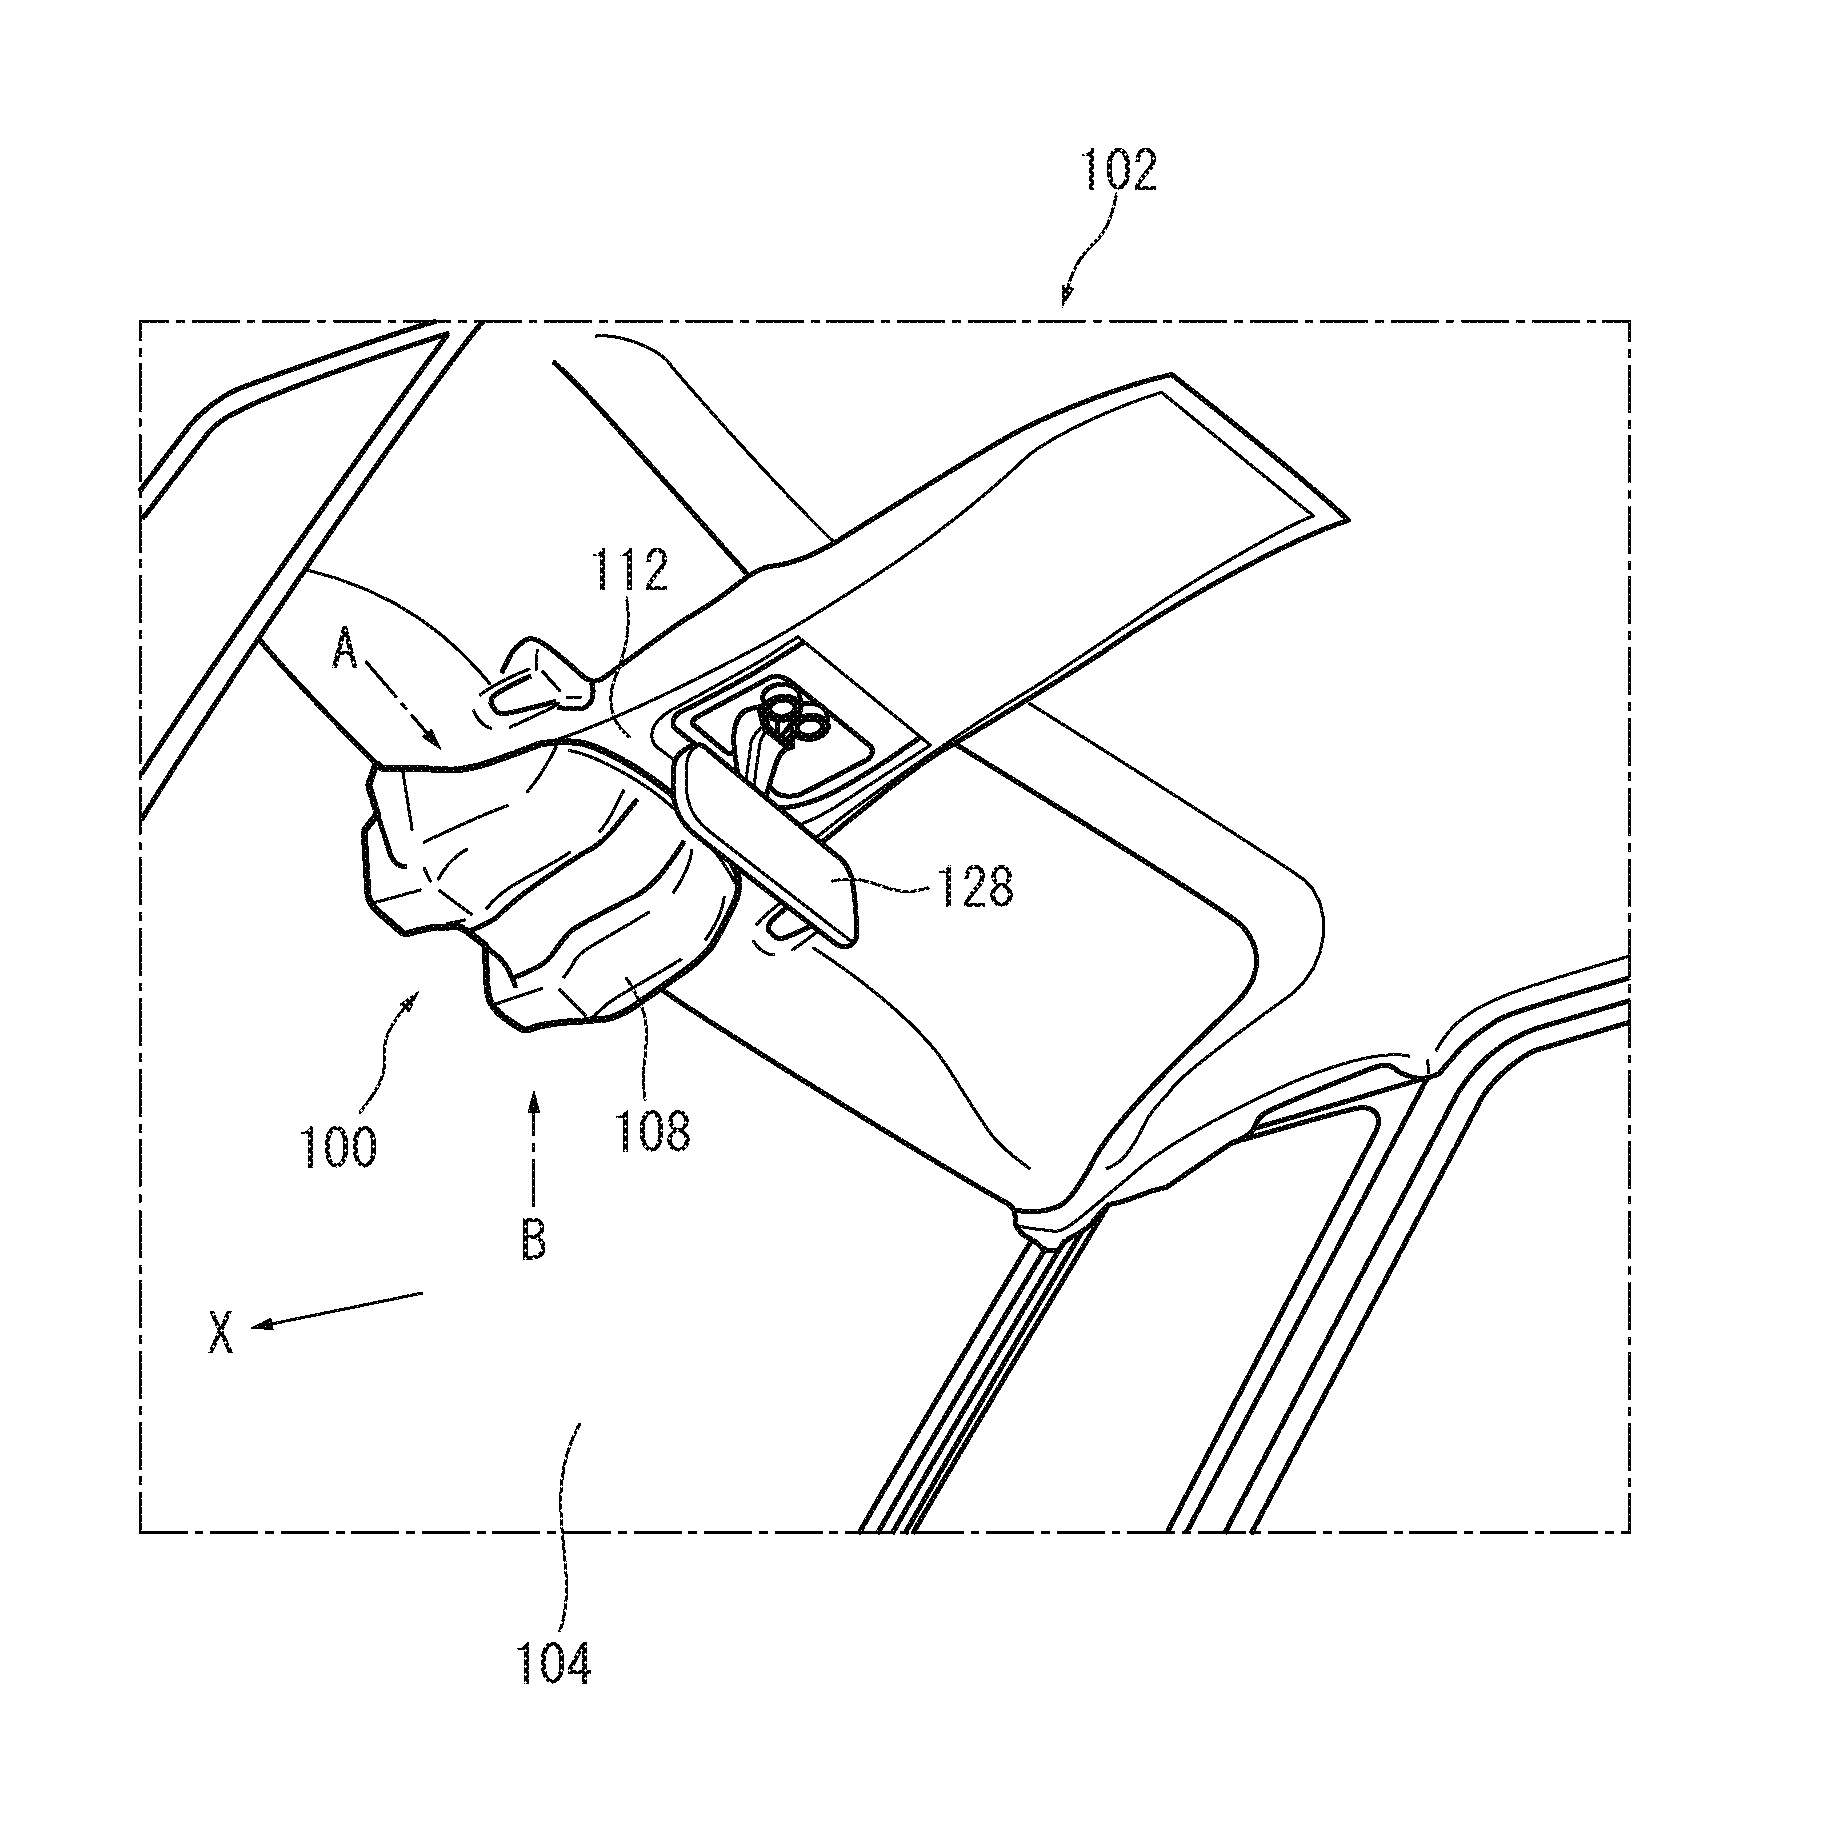 In-vehicle device covering structure